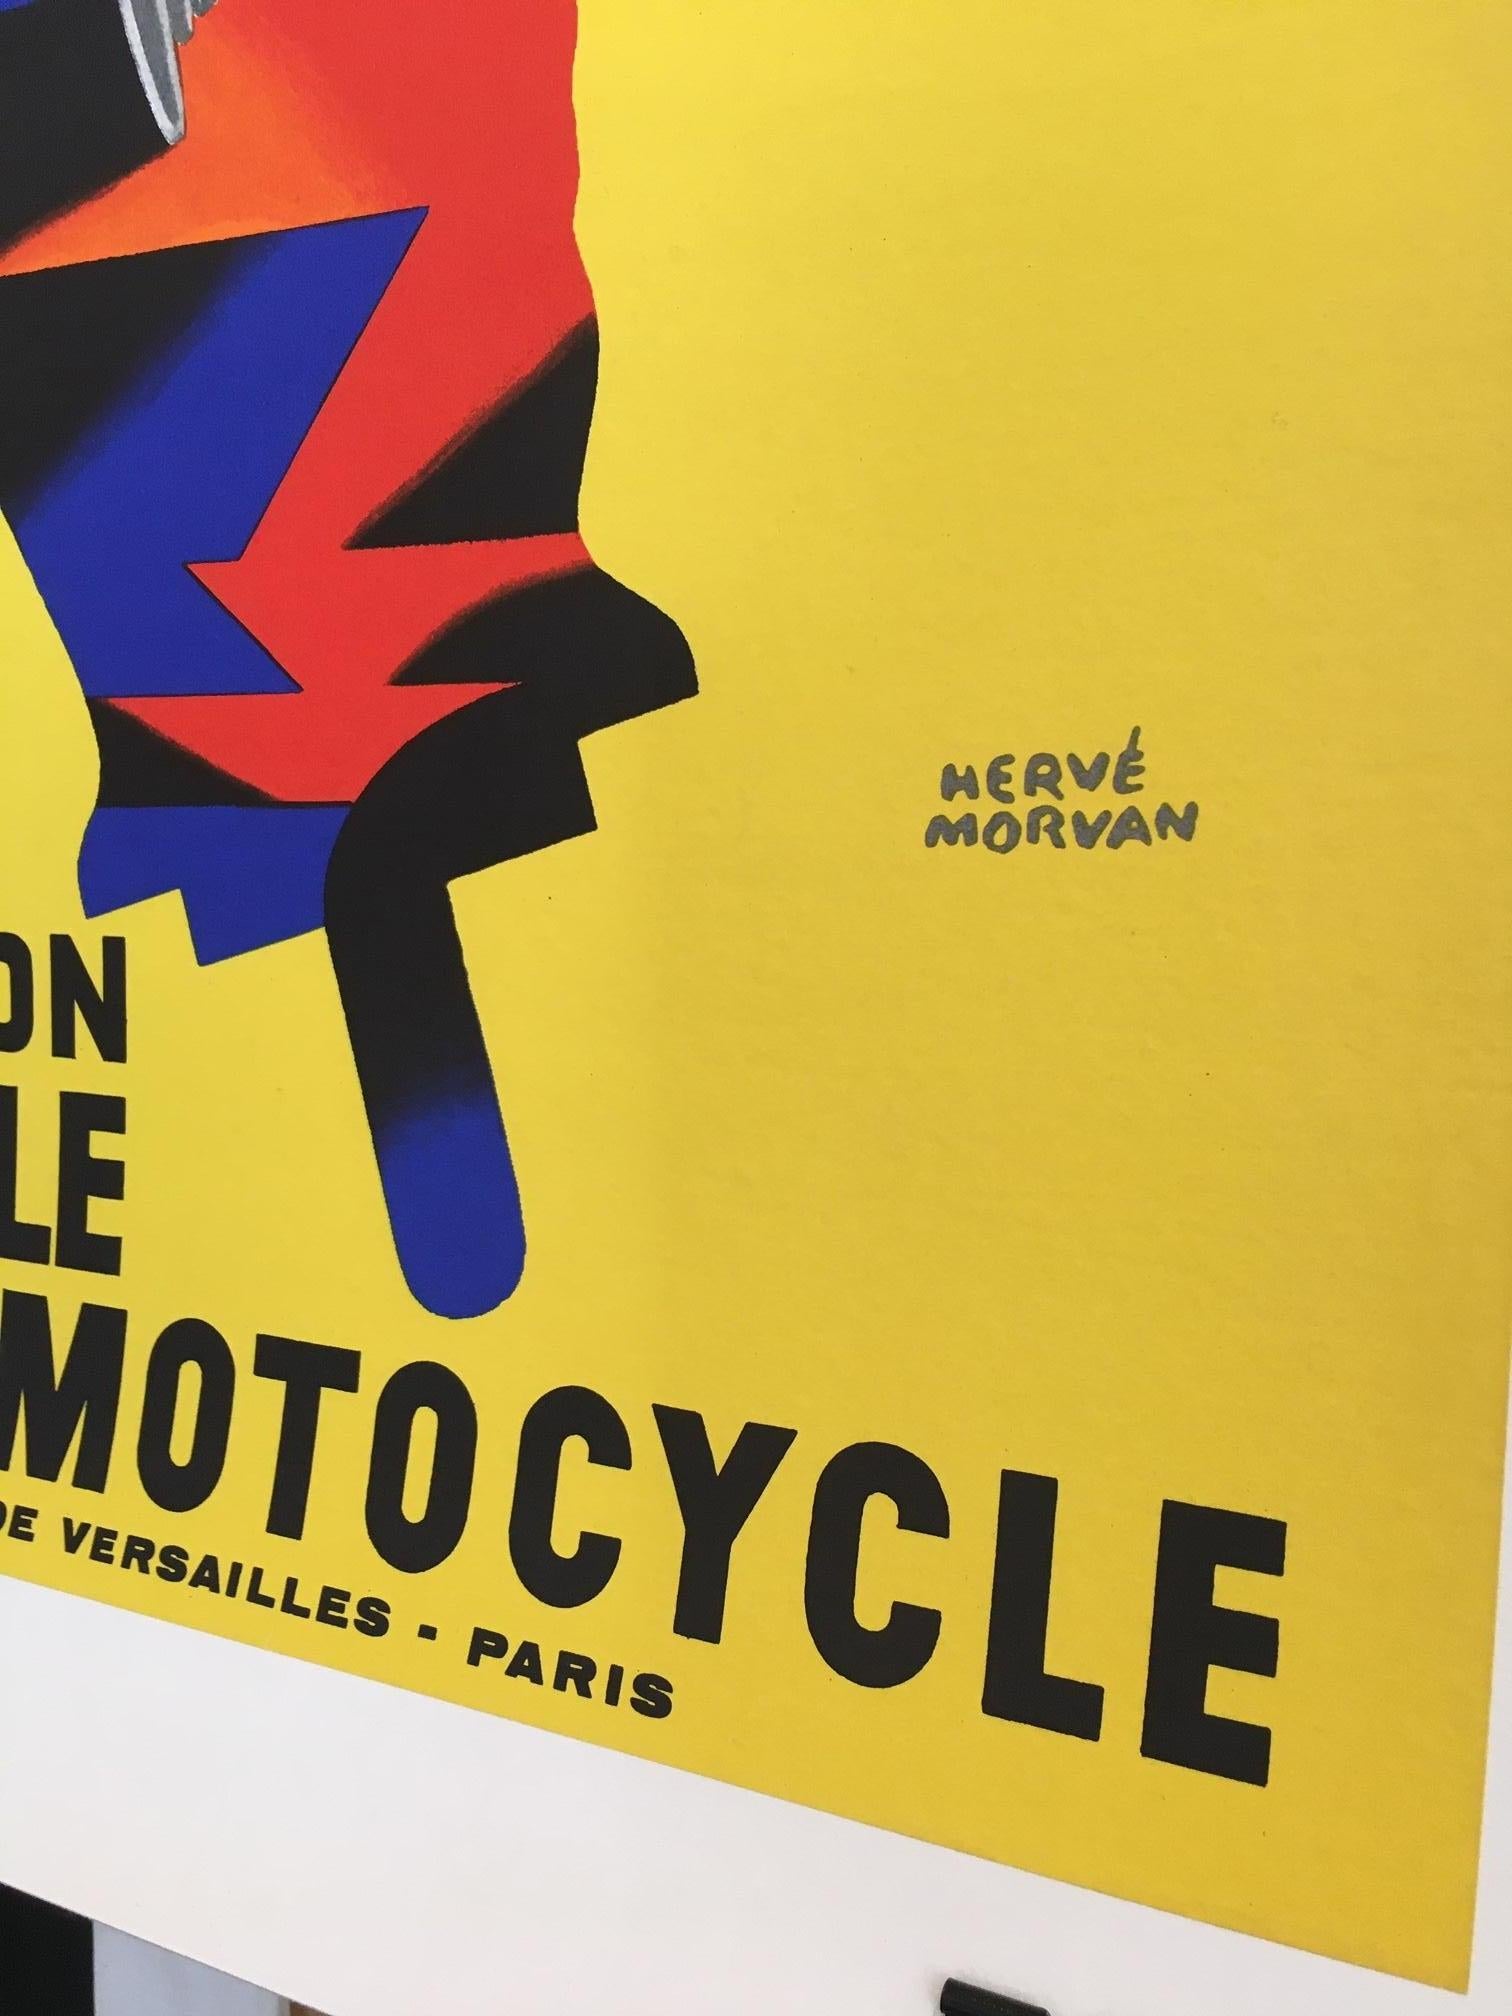 Herve Morvan - Original vintage poster, 'Cycle and Motorcycle Show', 1977

Herve Morvan is a French artist from the 1950s that designed many posters using humorous happy characters. This is an original vintage advertising poster.


Artist: